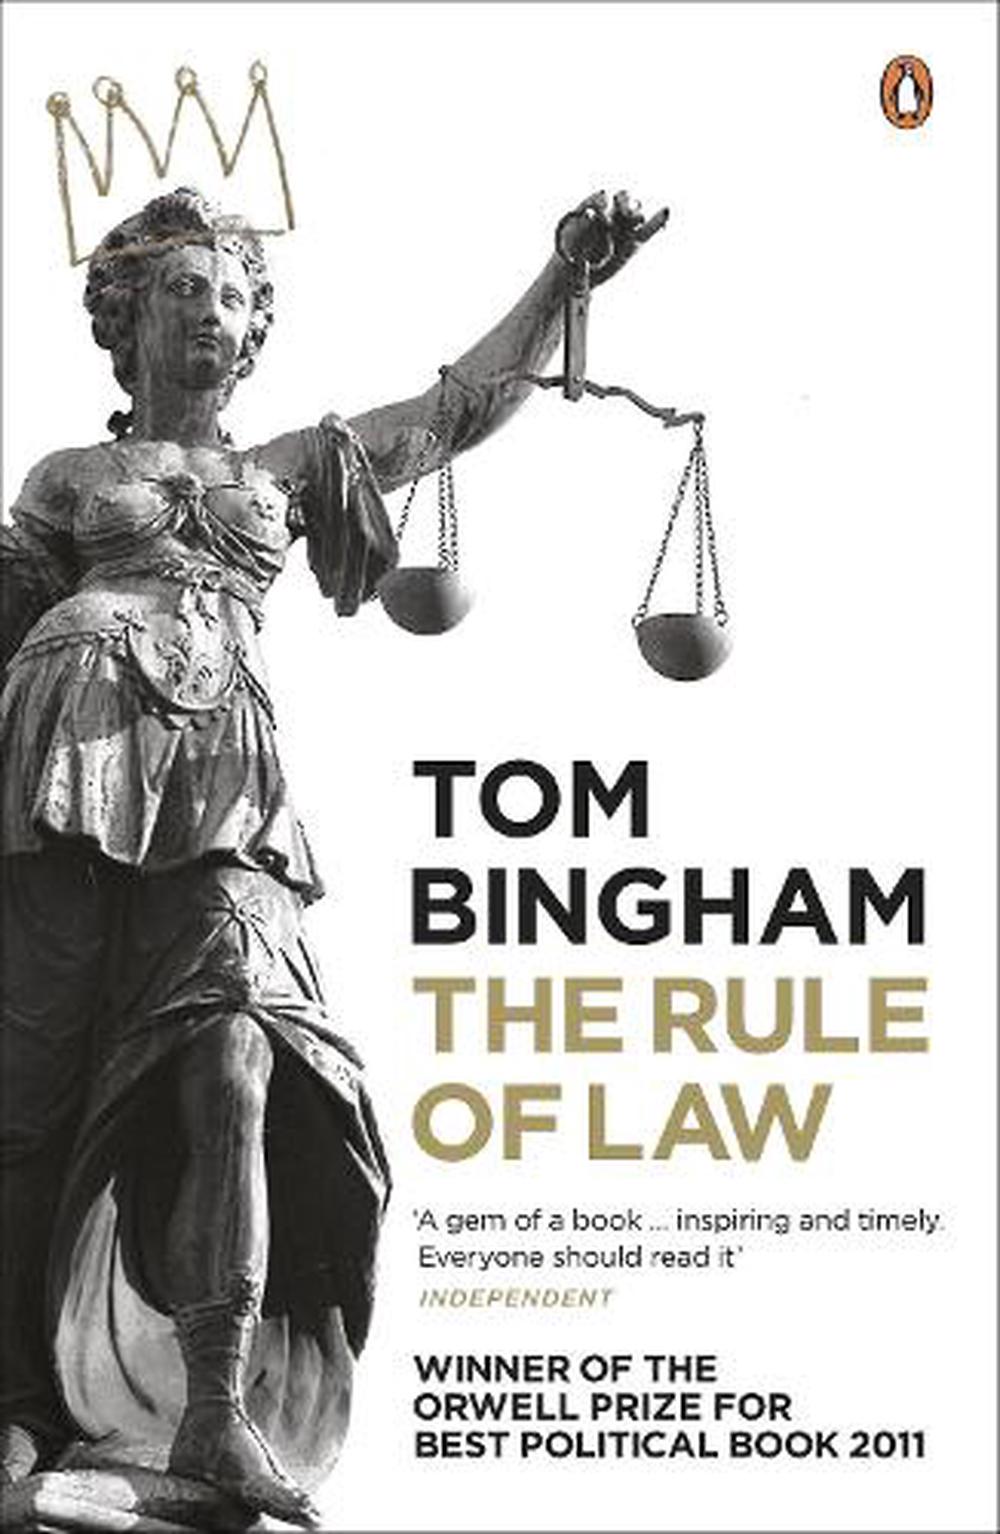 report on the rule of law